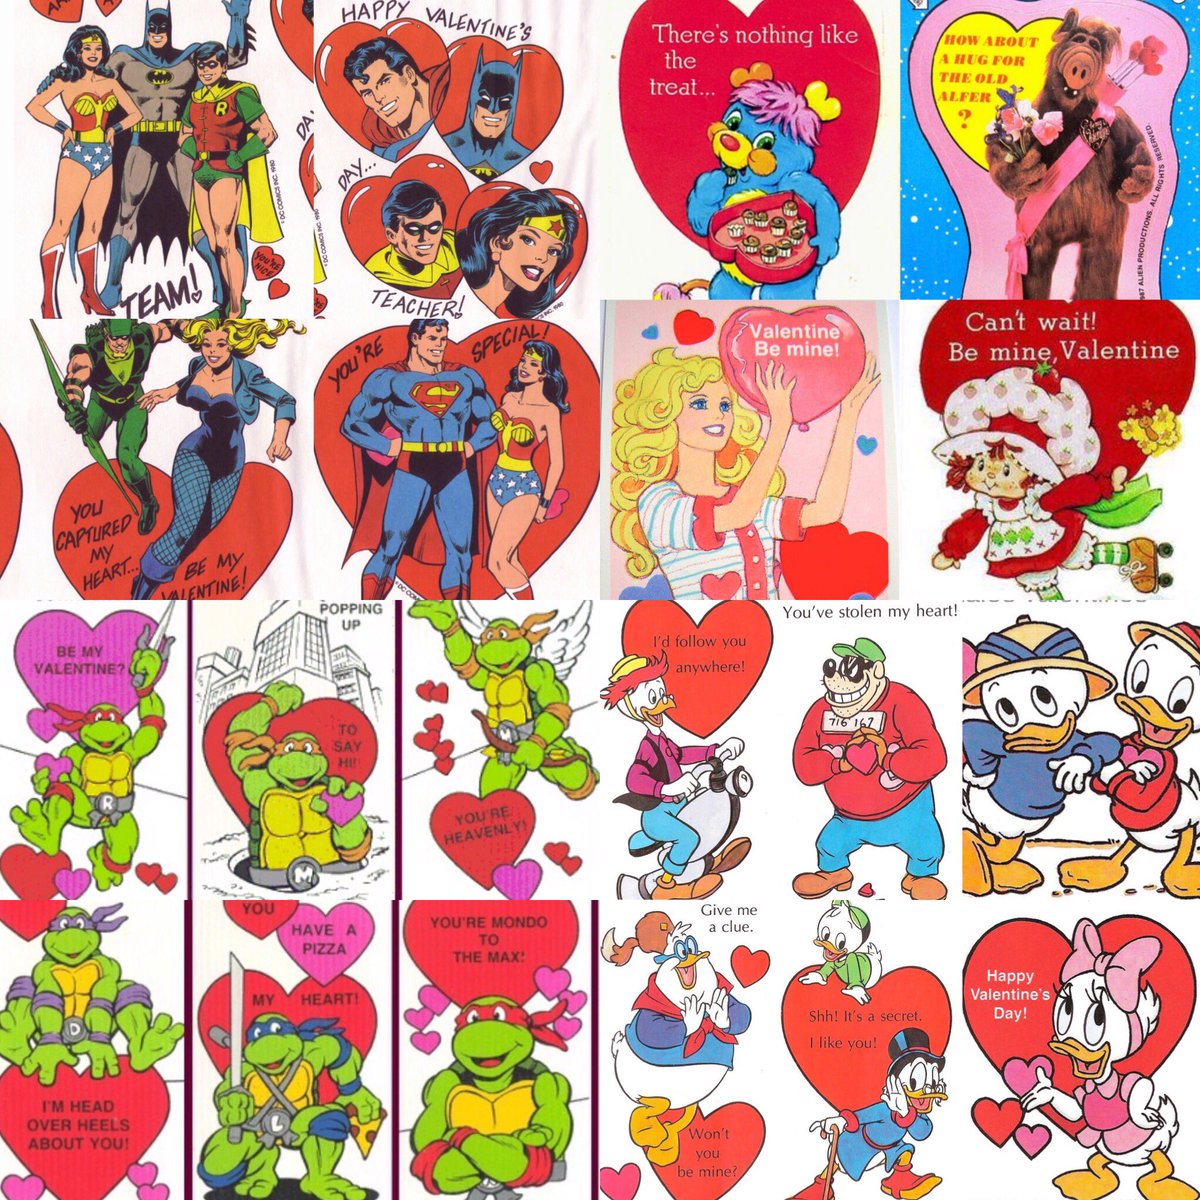 80sThen80sNow on X: TAG A FRIEND AND SHARE THE 80s LOVE! Happy Valentines  Day to All my Beautiful 1980s Family, Courtesy of 1980-1989 Greeting Cards!  #HappyValentinesDay #Valentines #Valentine #Love #TMNT #Marvel #DC #